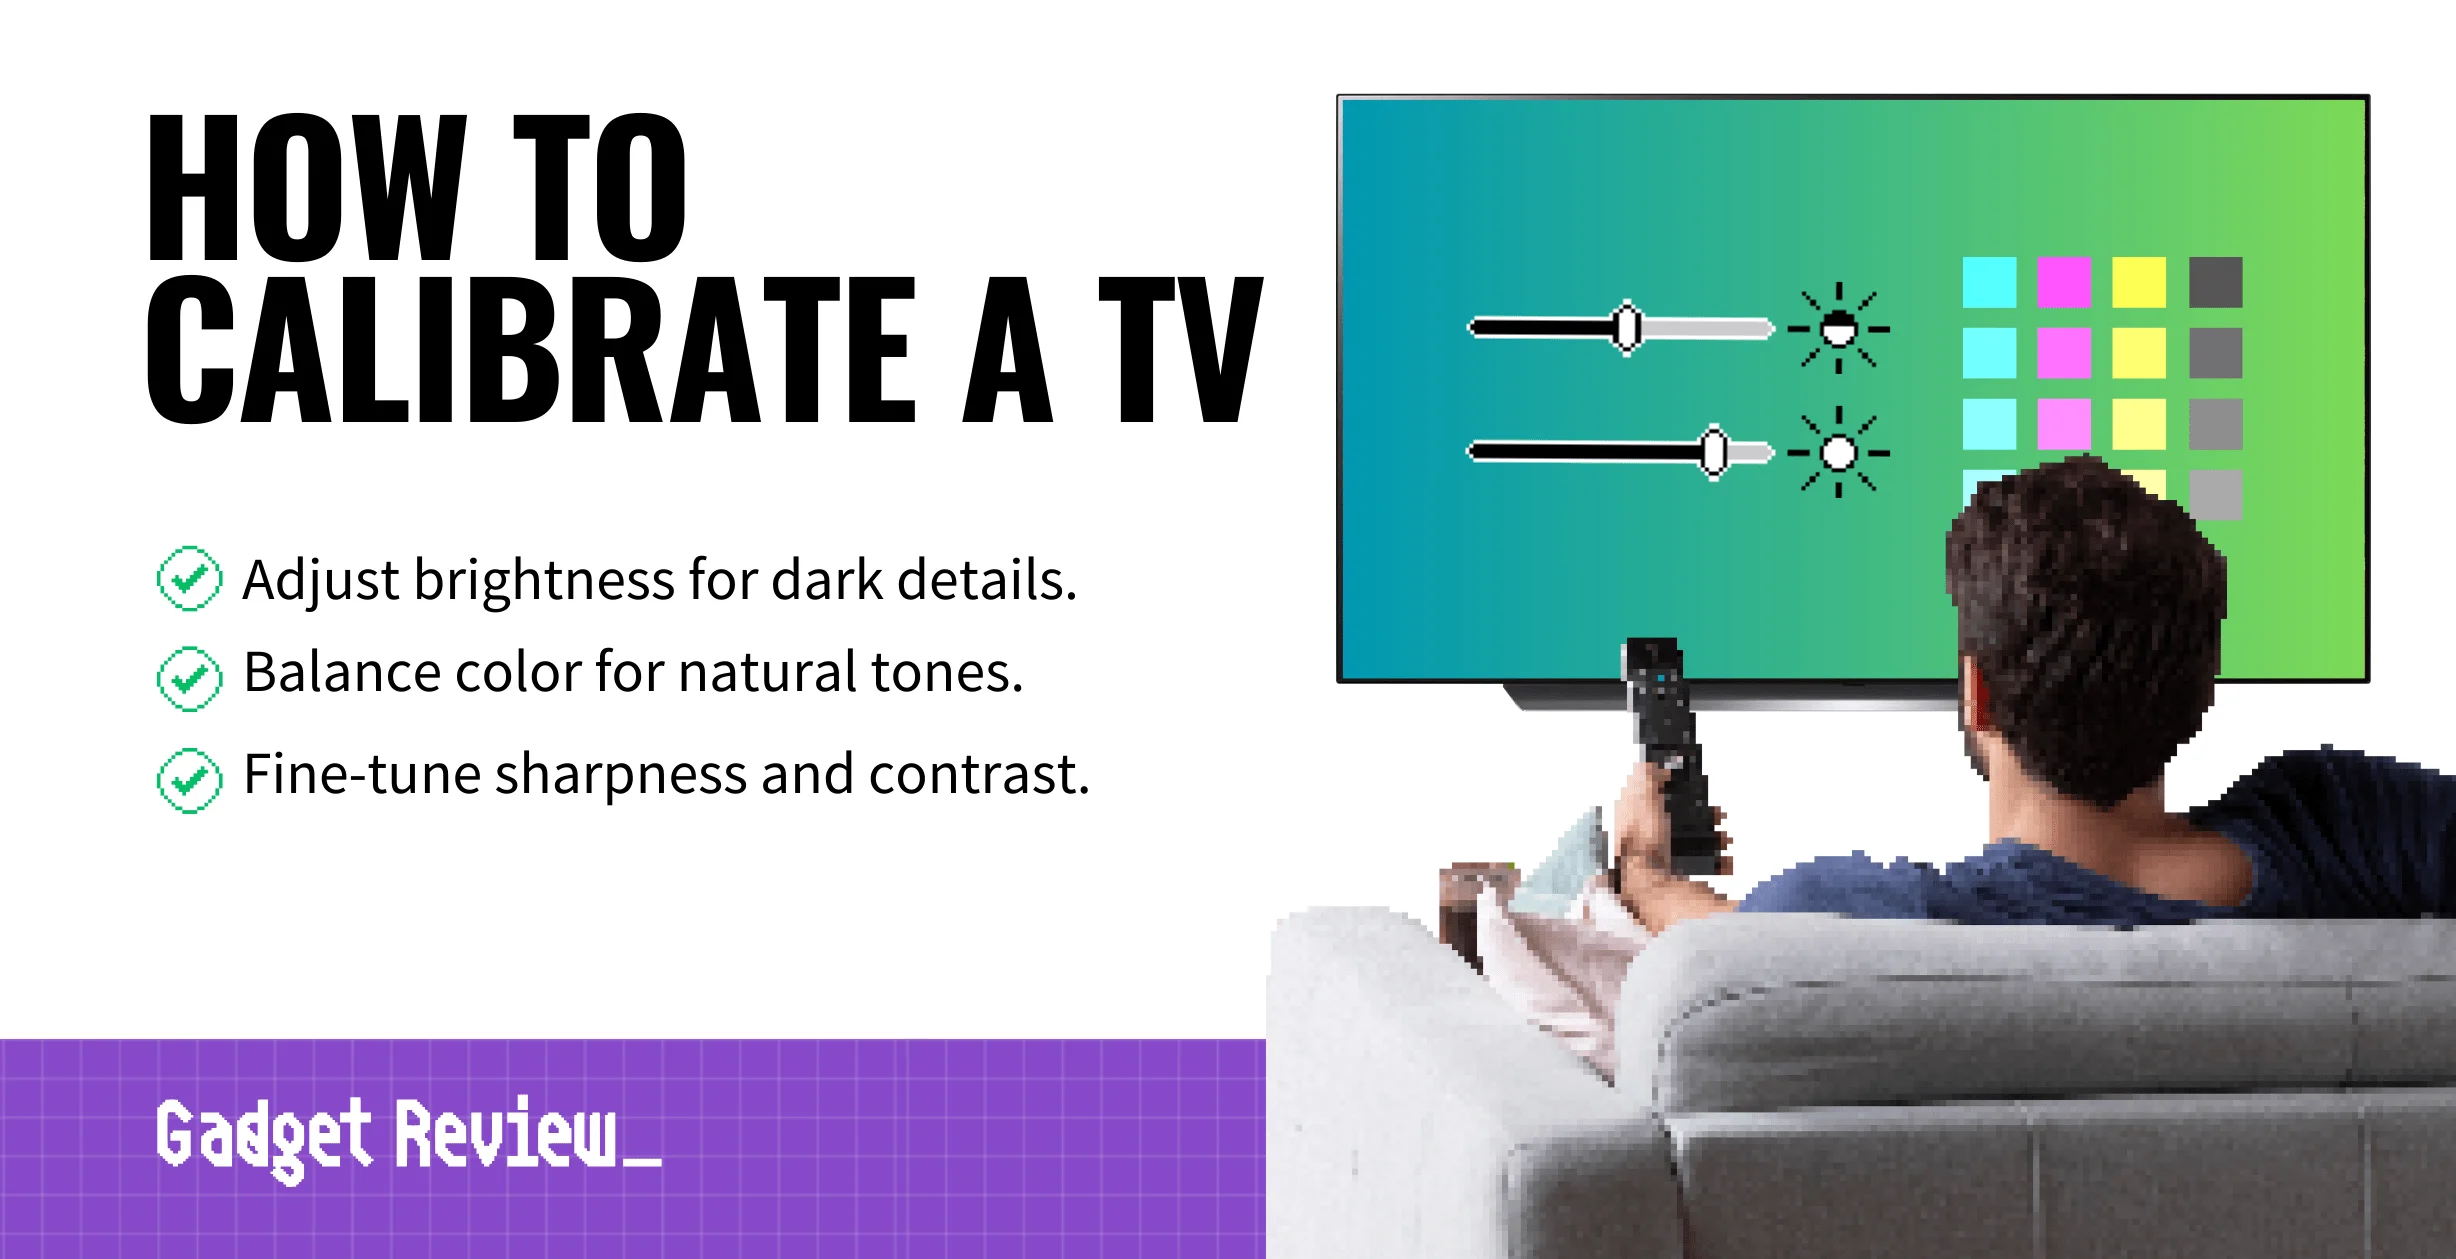 How to Calibrate a TV